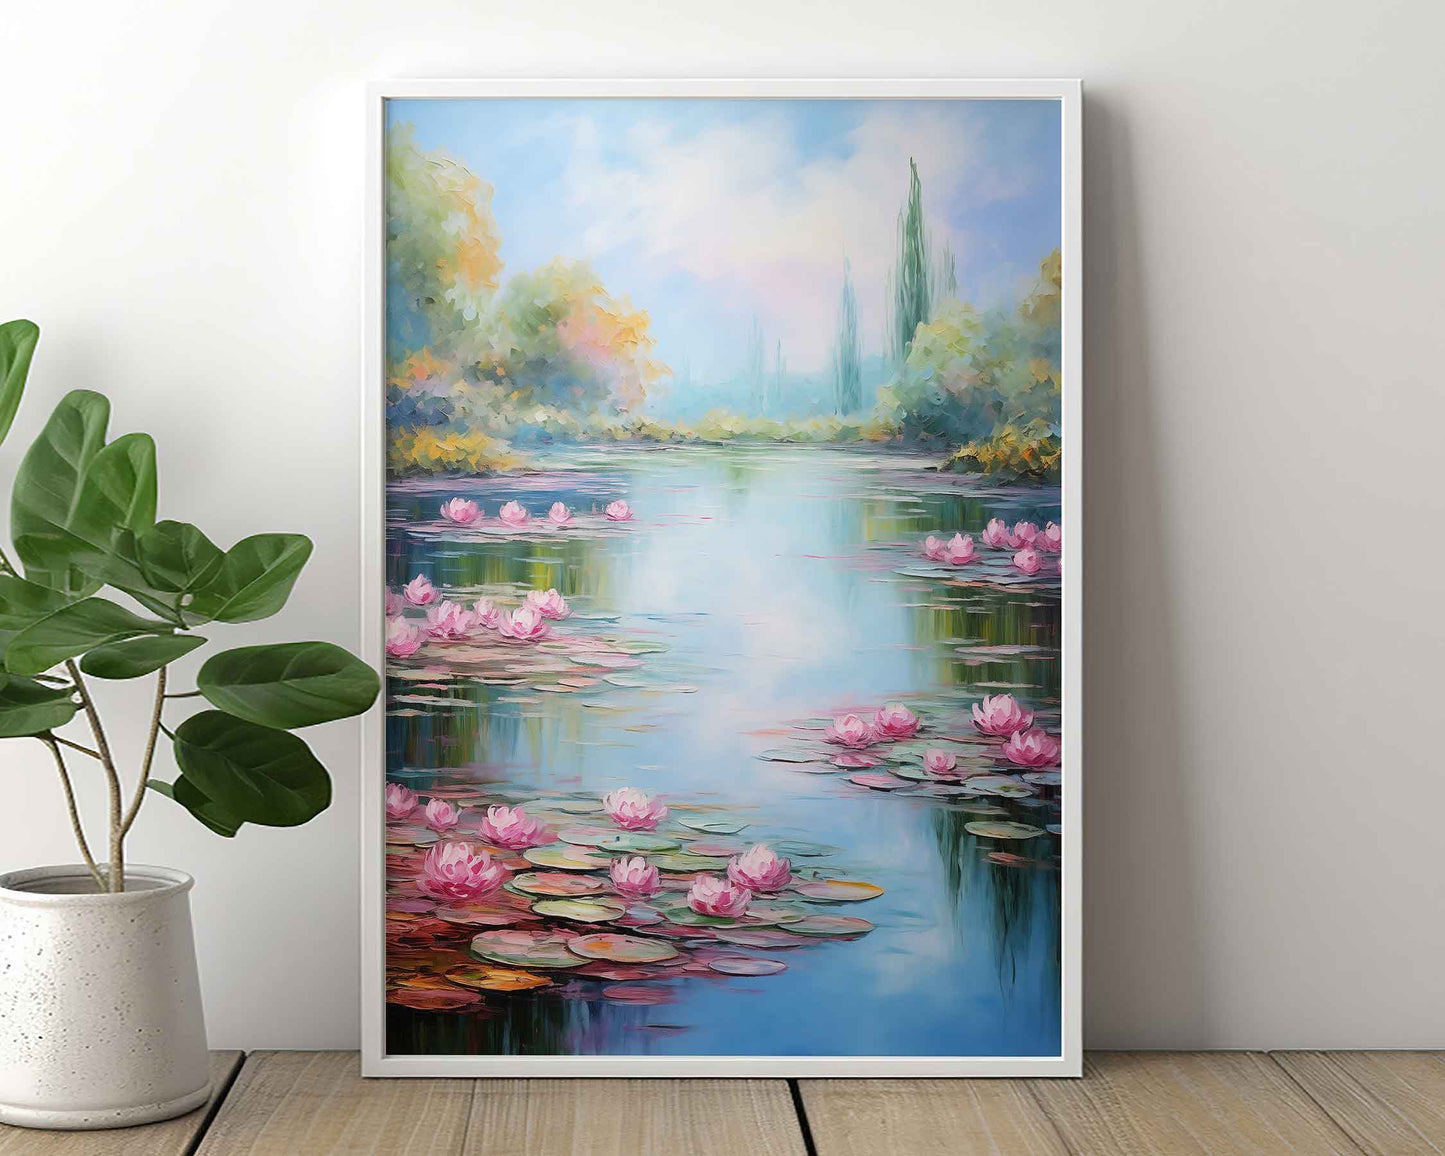 Framed Image of Monet Style Lake With Pink Lilies Wall Art Print Poster